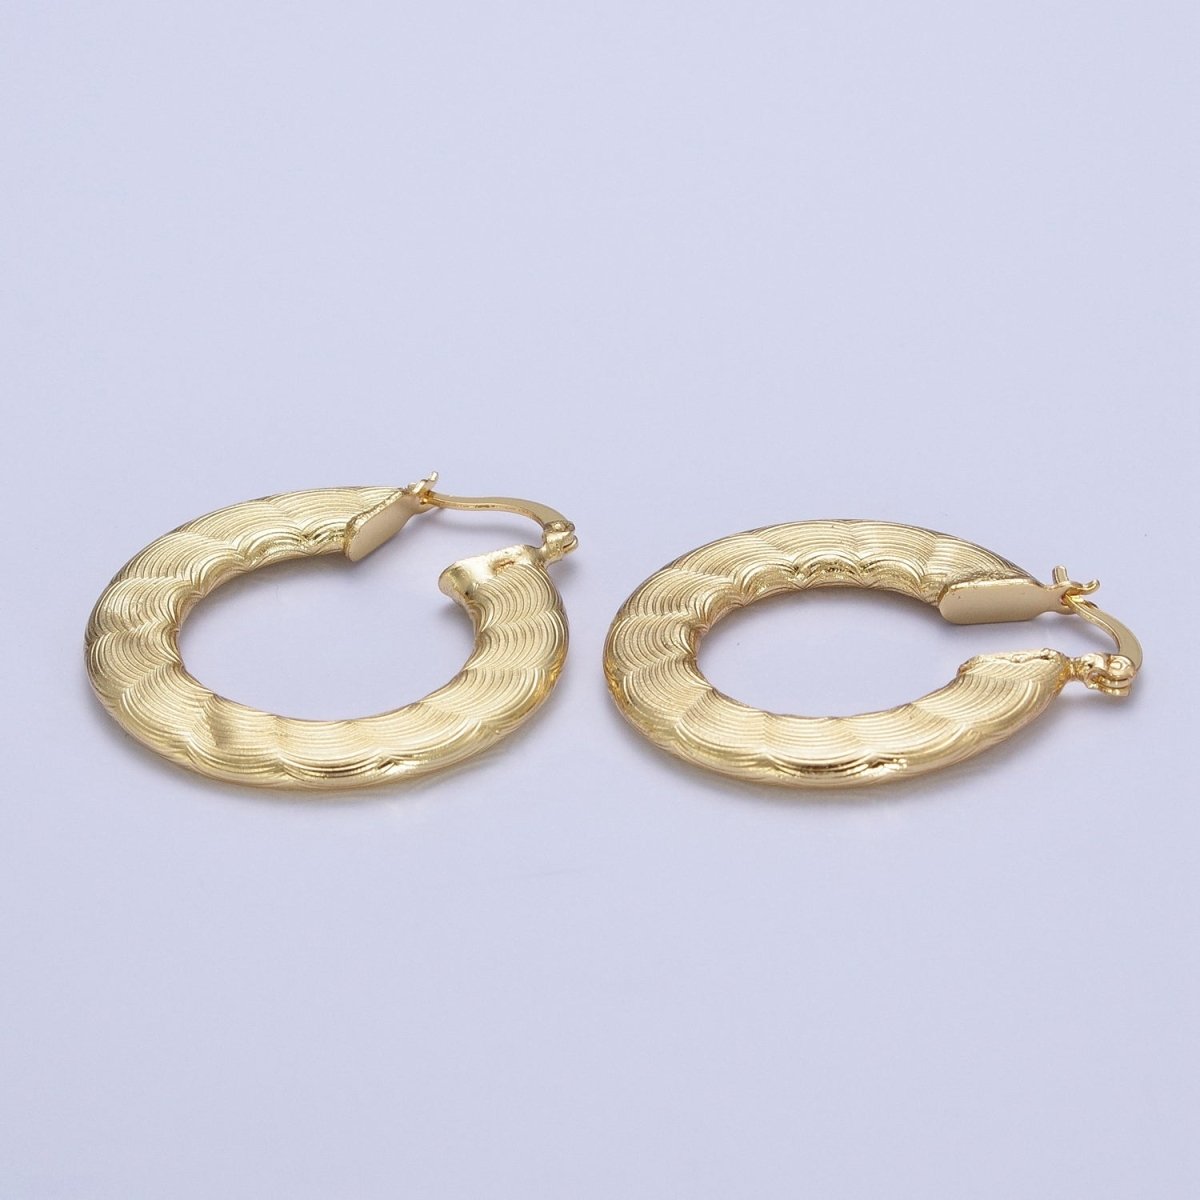 Unique Gold Hoops Pattern Earring for Fashion Statement Jewelry T-024 - DLUXCA